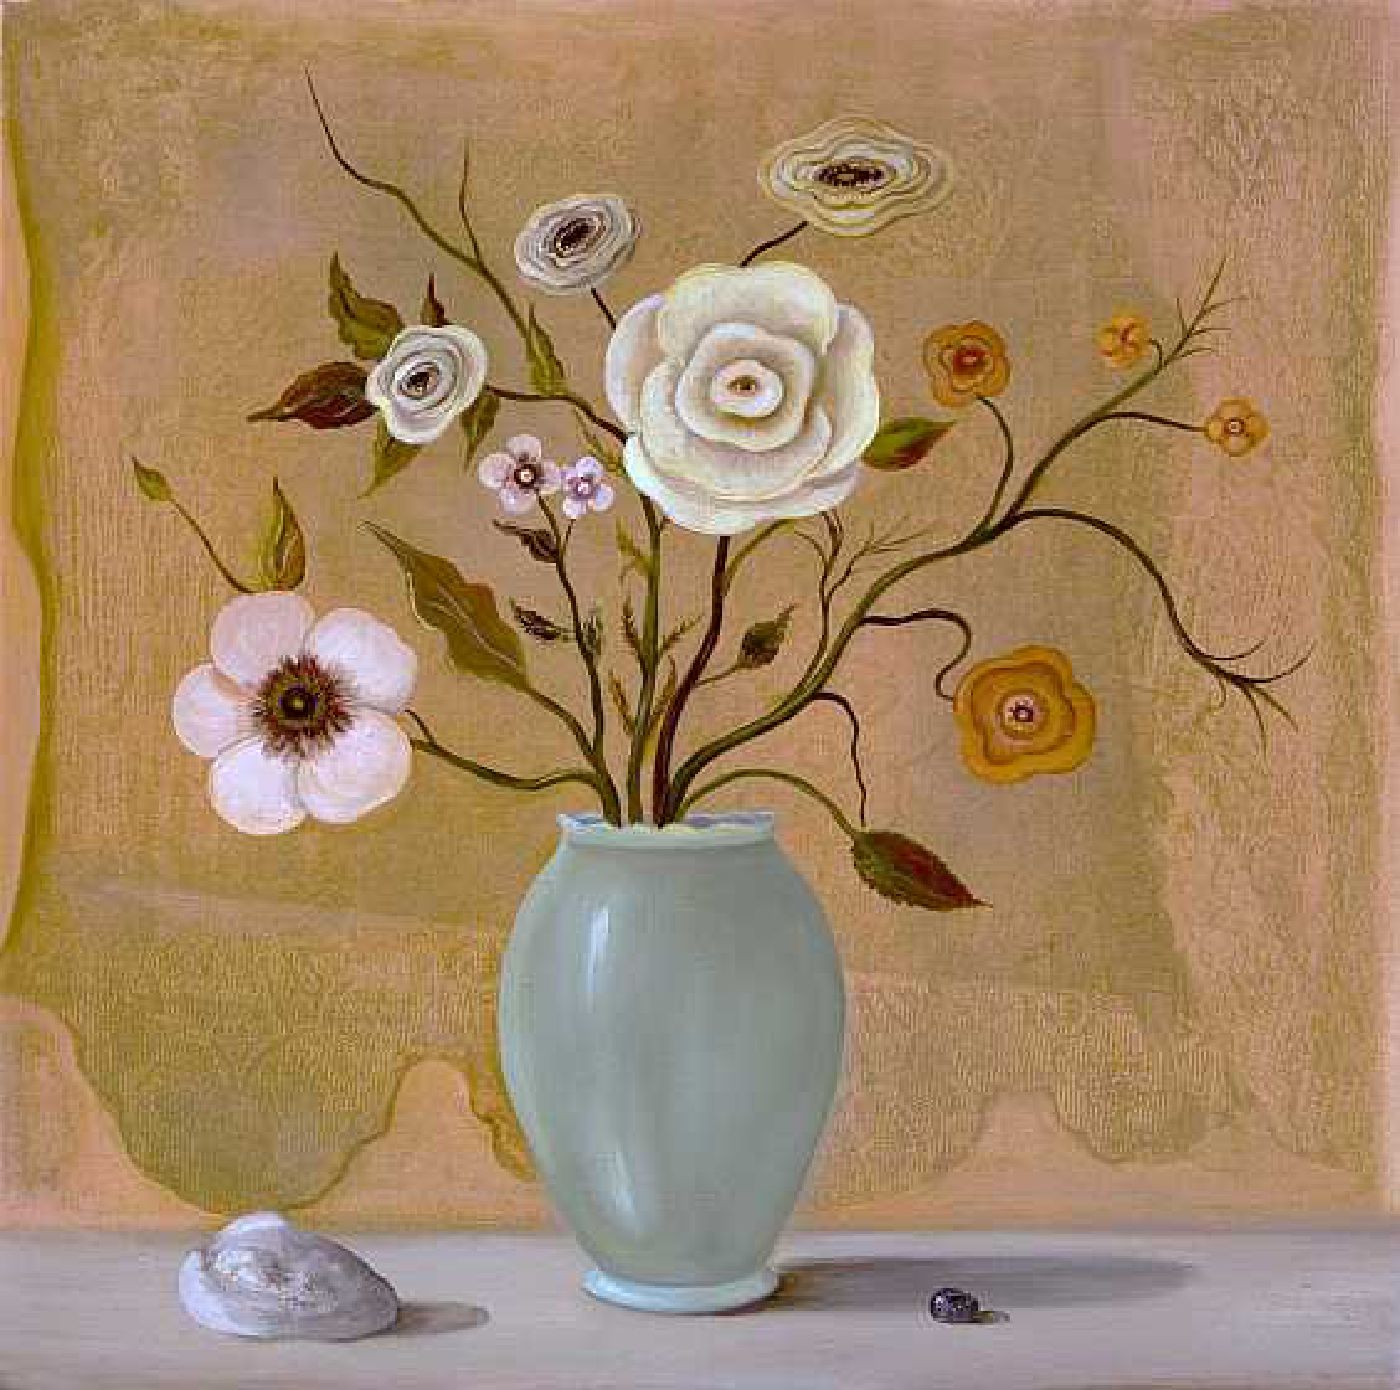 Still Life with Secret - oil on canvas, 24 x 24 inches, 2011